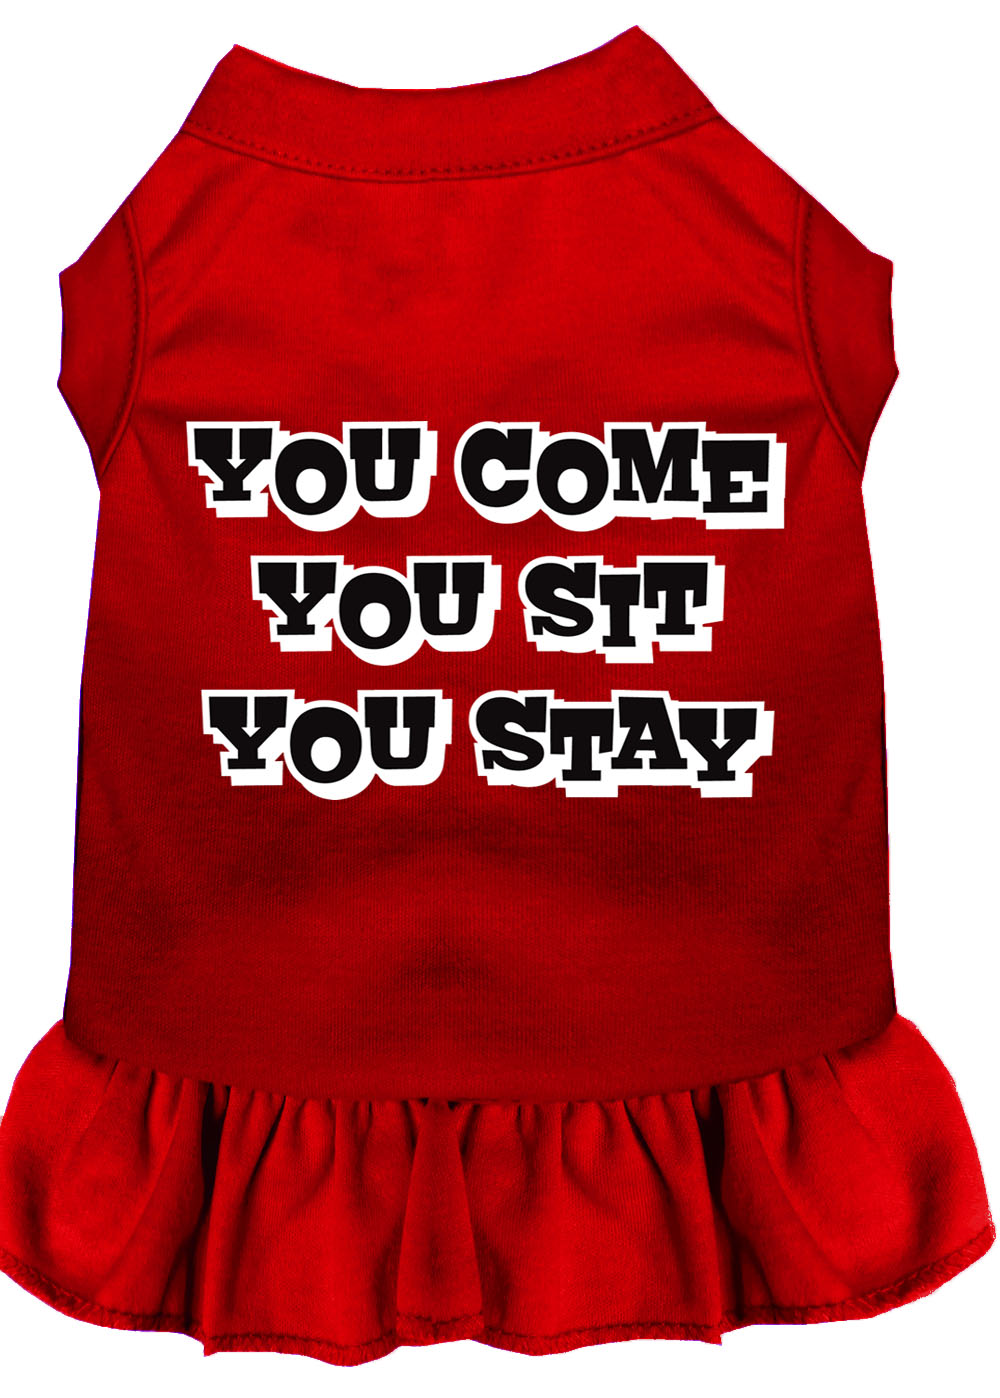 You Come, You Sit, You Stay Screen Print Dress Red Xl GreatEagleInc